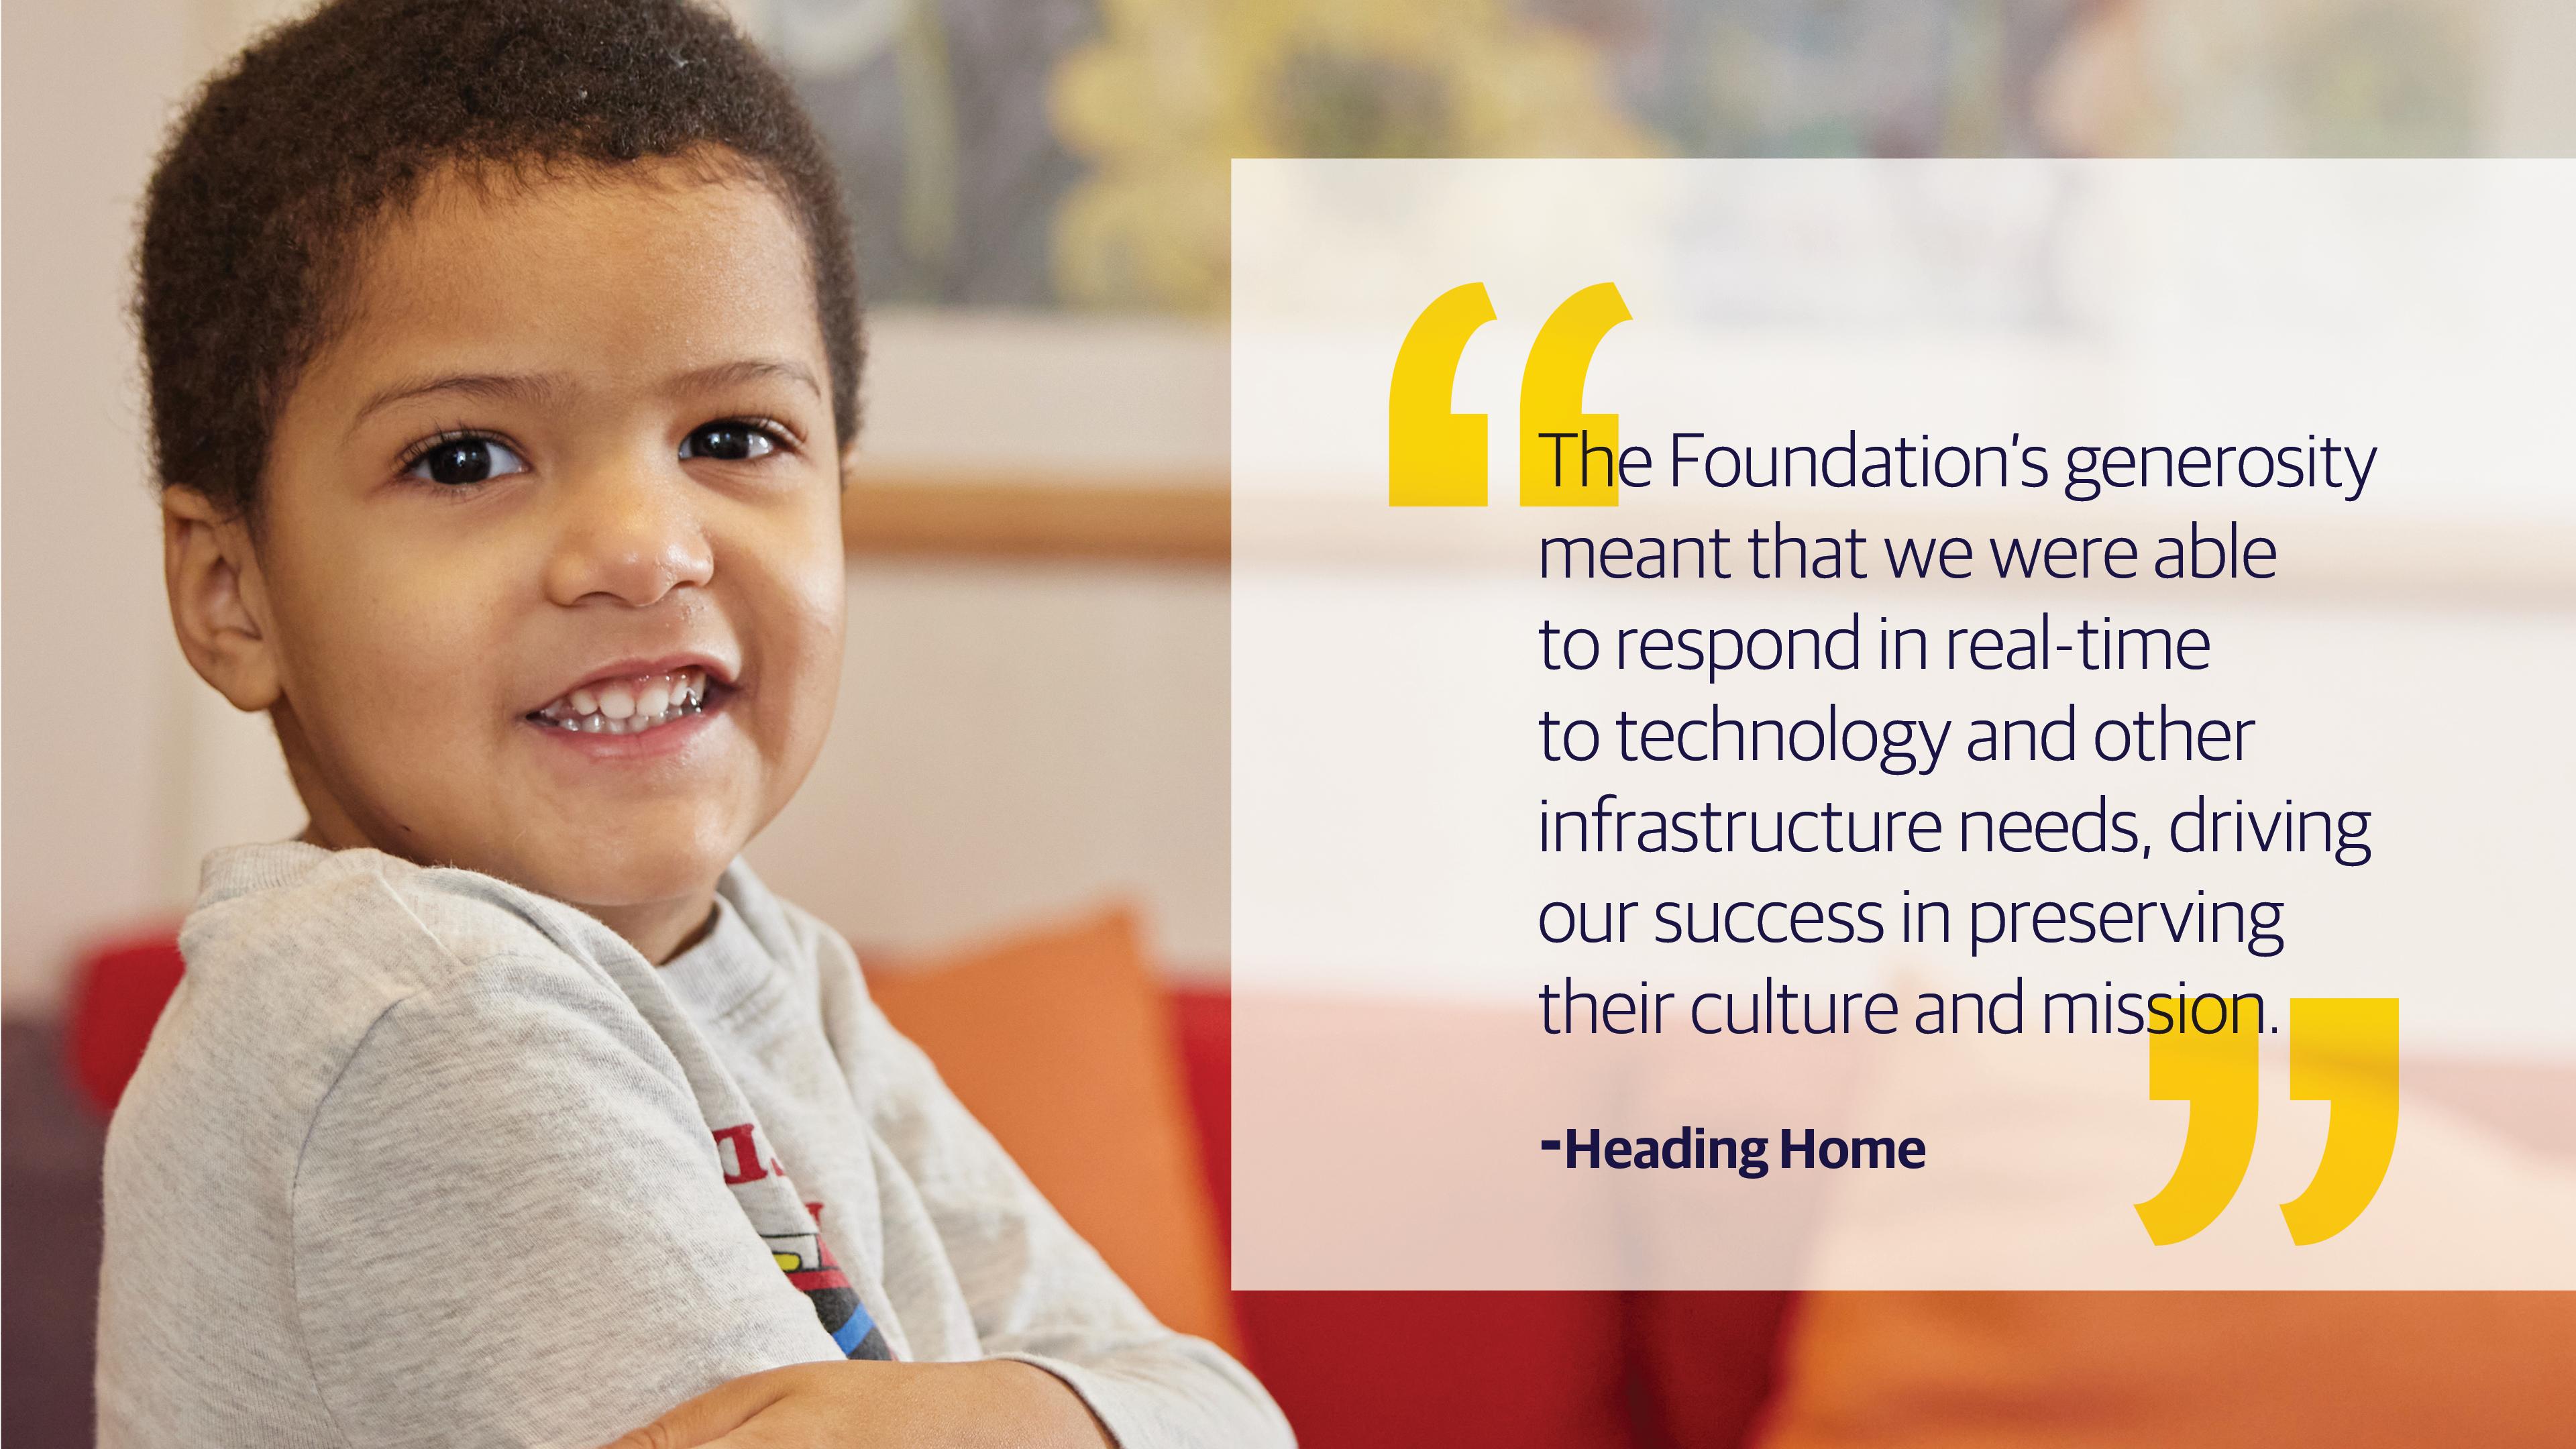 (slide 1 of 3) "The Foundations generosity meant that we were able to respond in real-time to technology and other infrastructure needs, driving our success in preserving their culture and mission." - Heading Home . 